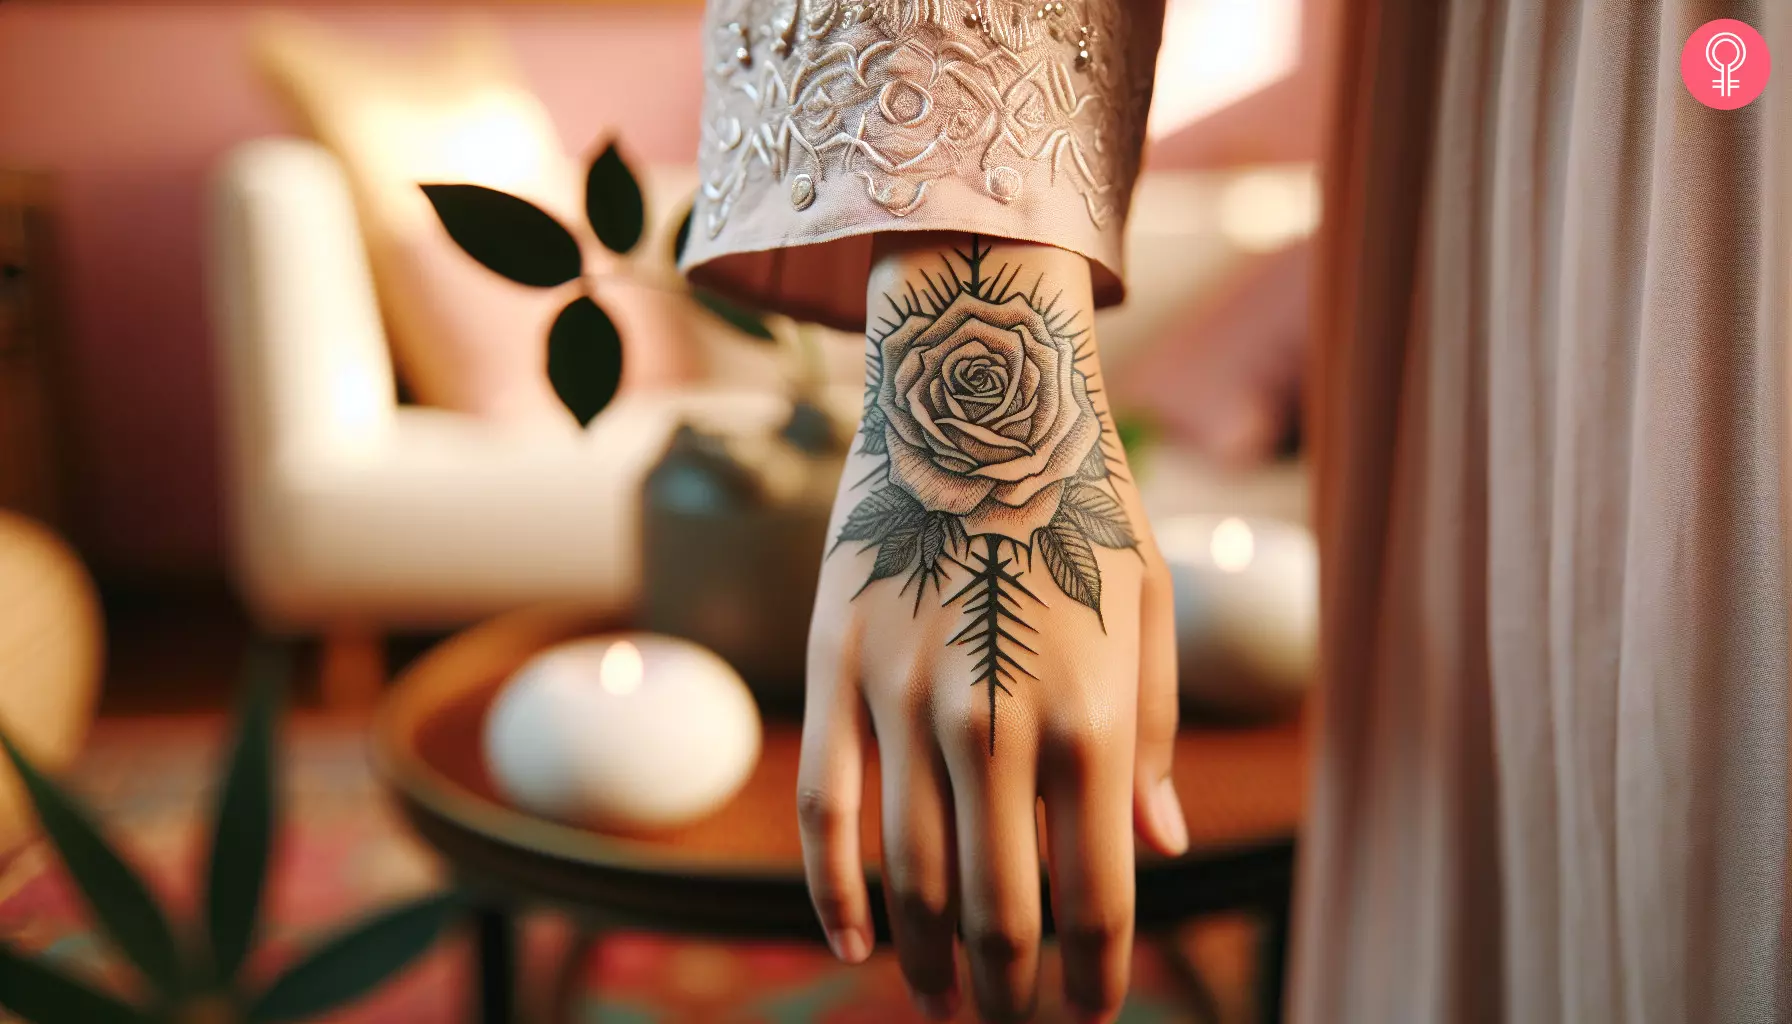 A rose with thorns tattoo on the hand